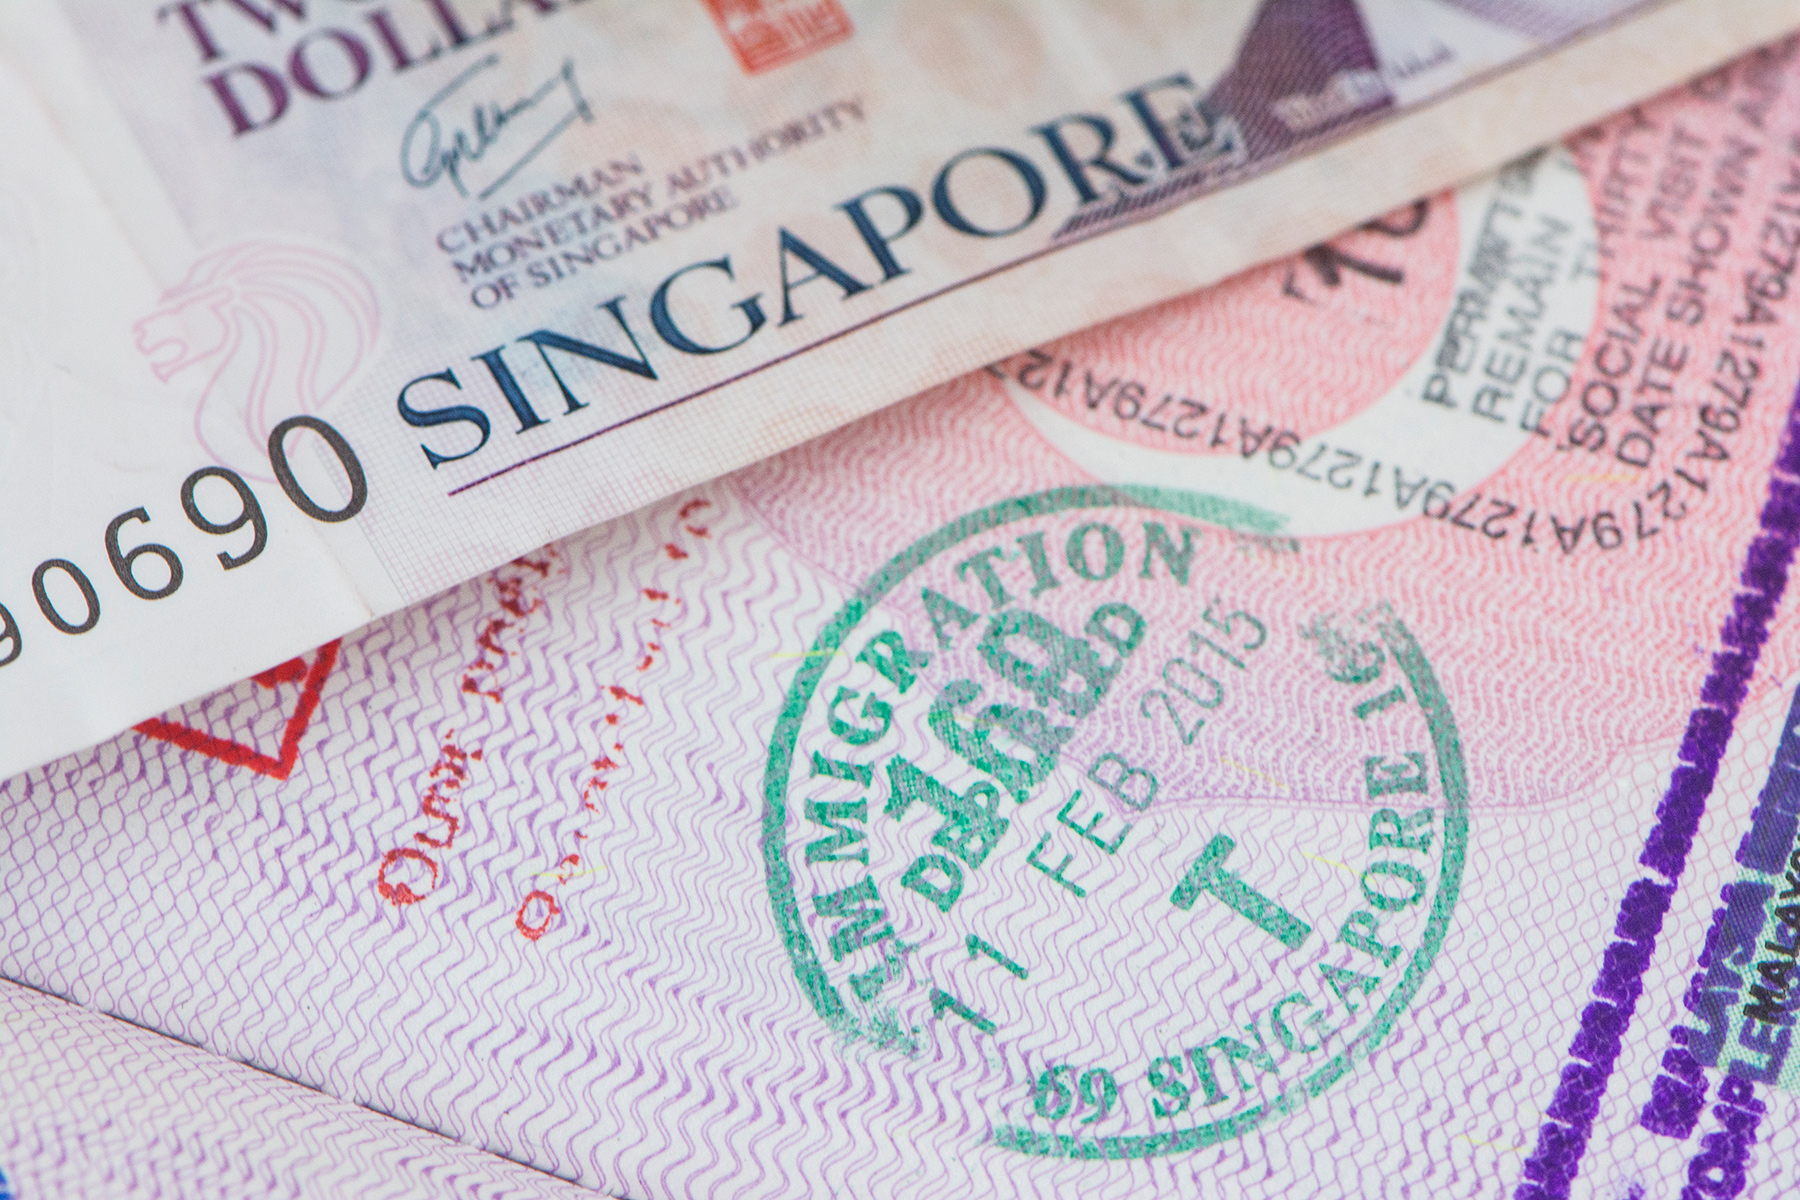 Close up of an immigration stamp for Singapore in a passport